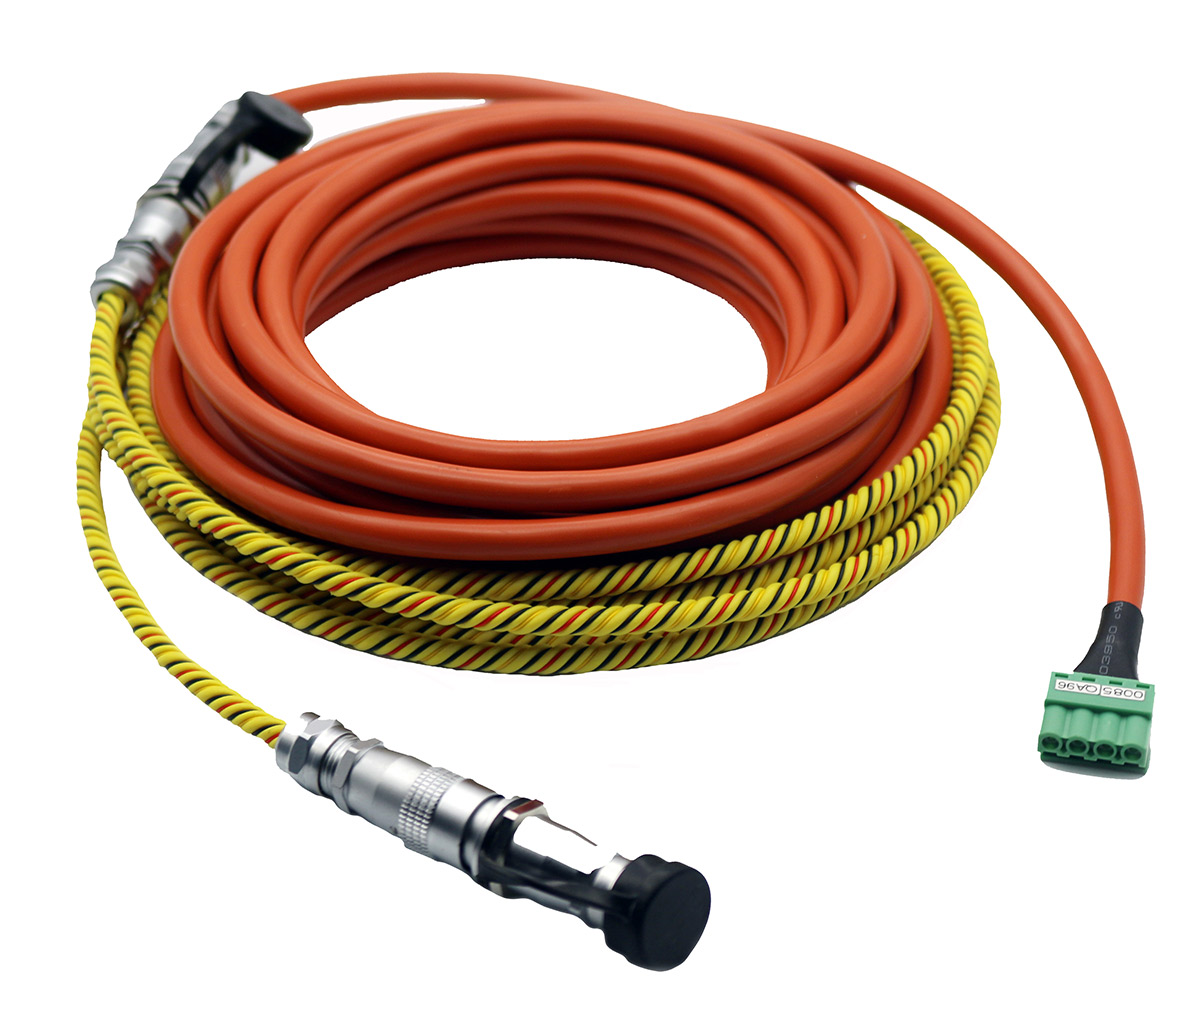 AKCP - LWSCCAB10 - Extension cable for RWSC10 and LWSC10